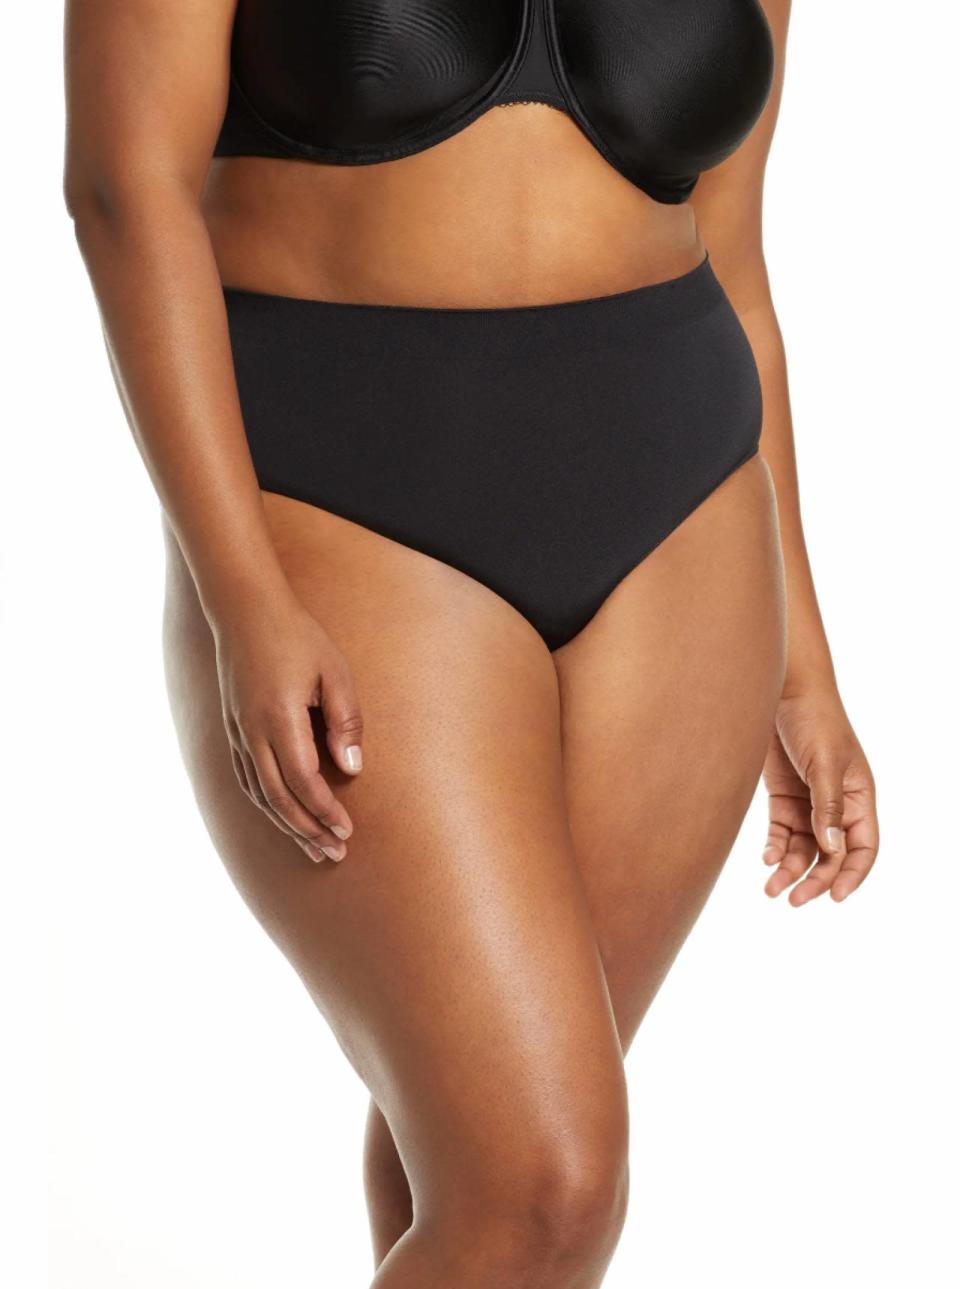 We love the high waist on these smoothing briefs for added tummy support. The style comes in six other neutral colors—ideal if you want your undies to disappear under clothing. $15, Nordstrom. <a href="https://www.nordstrom.com/s/wacoal-b-smooth-briefs-buy-more-save/3085320" rel="nofollow noopener" target="_blank" data-ylk="slk:Get it now!" class="link ">Get it now!</a>